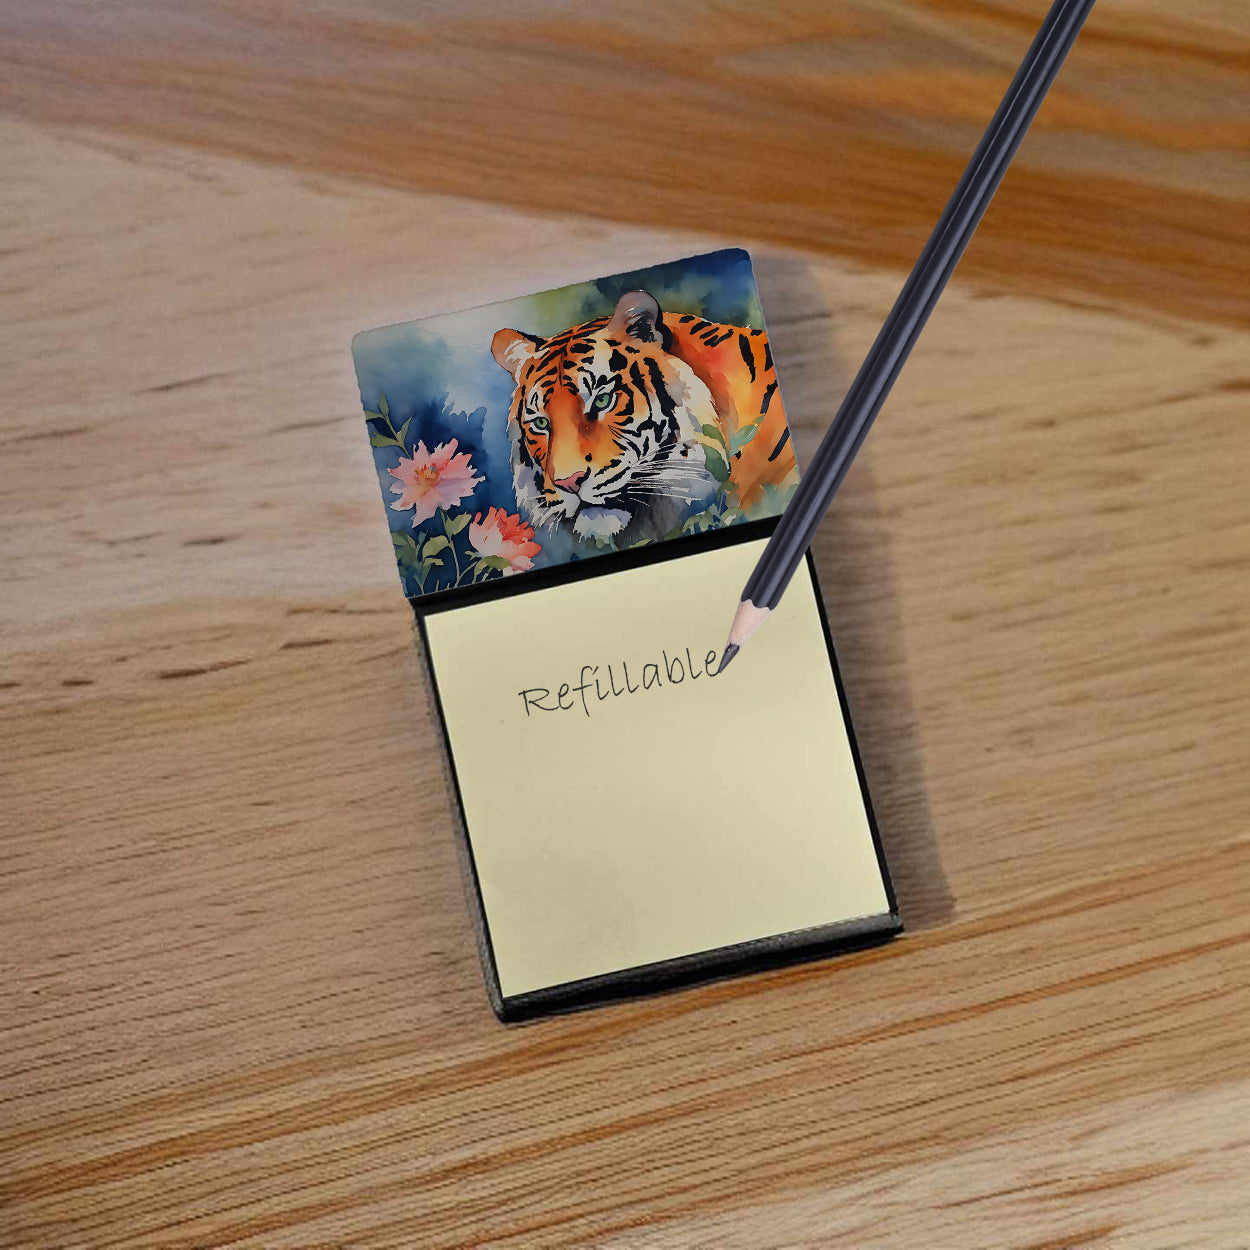 Buy this Tiger Sticky Note Holder